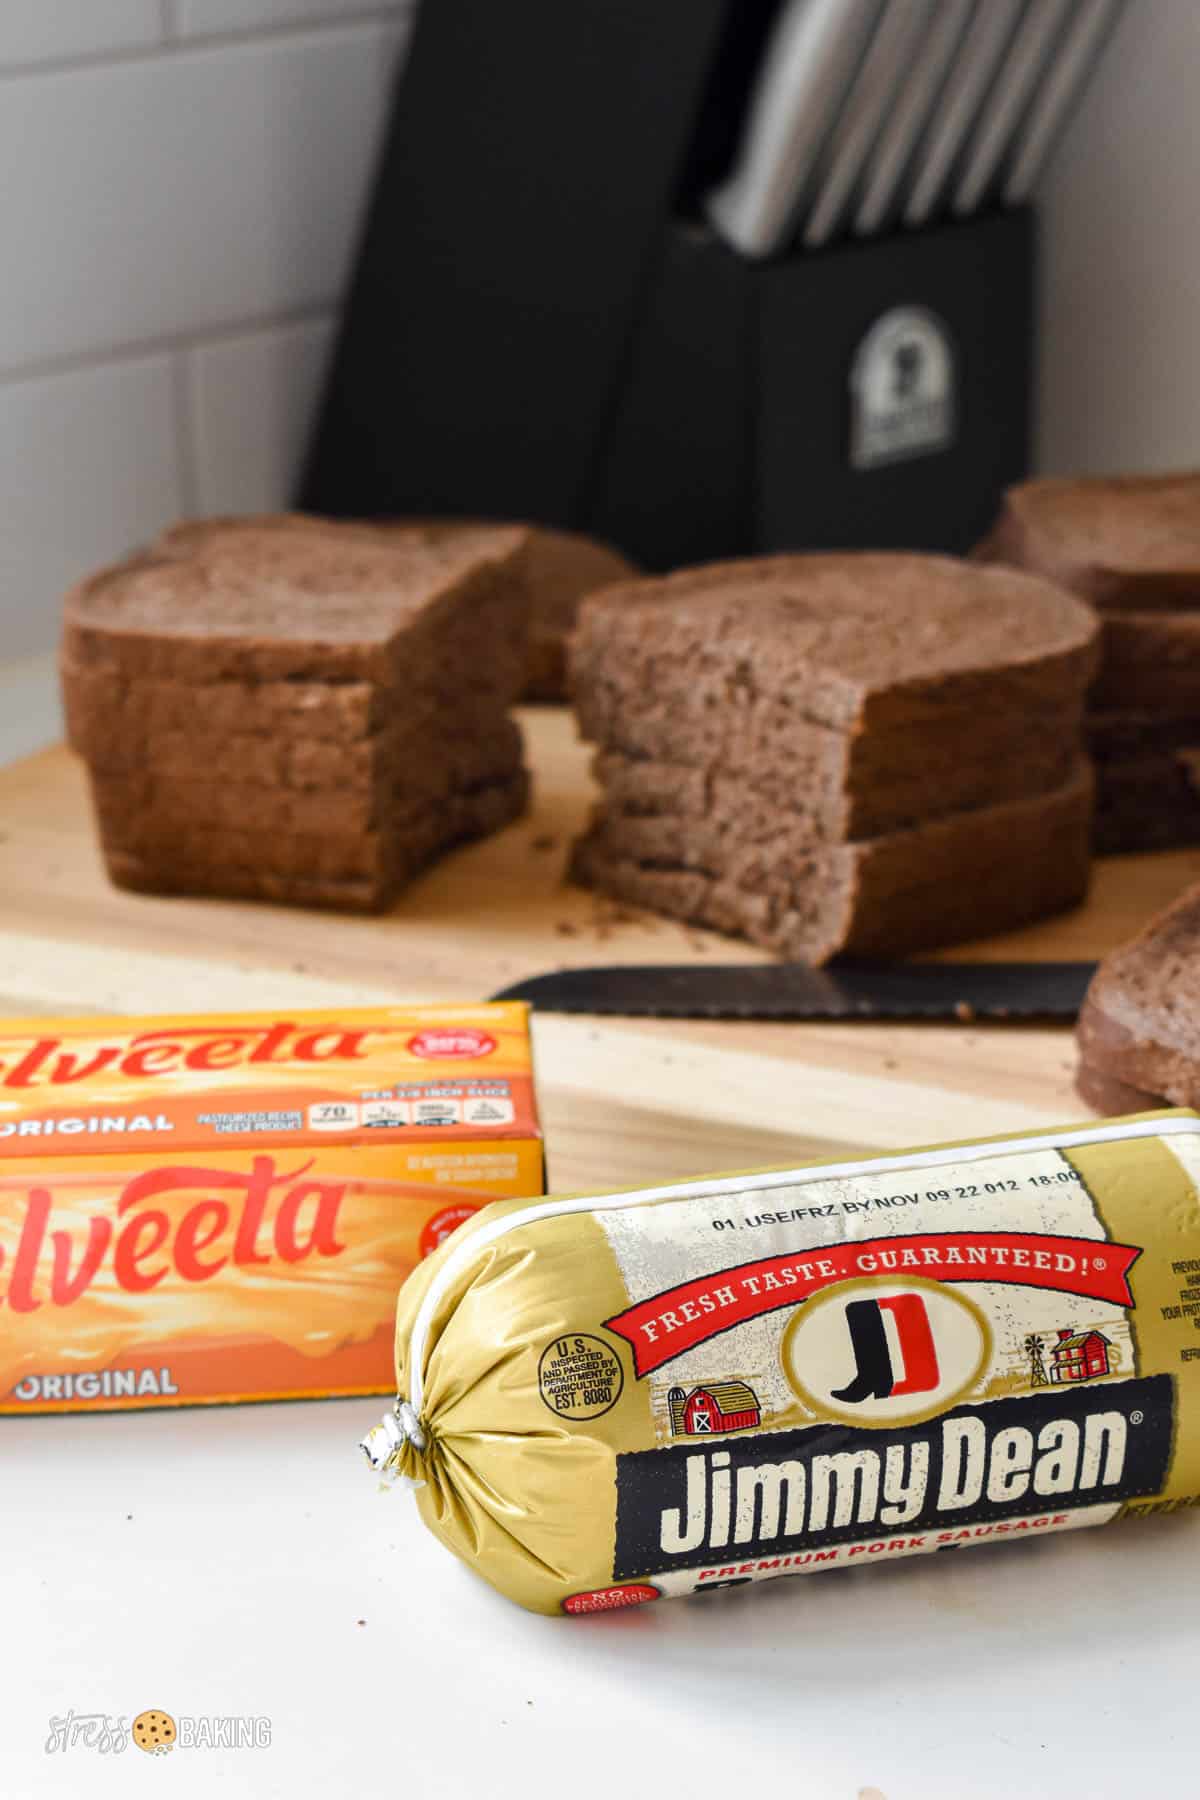 Jimmy Dean pork sausage and Velveeta next to a cutting board full of pumpernickel bread slices